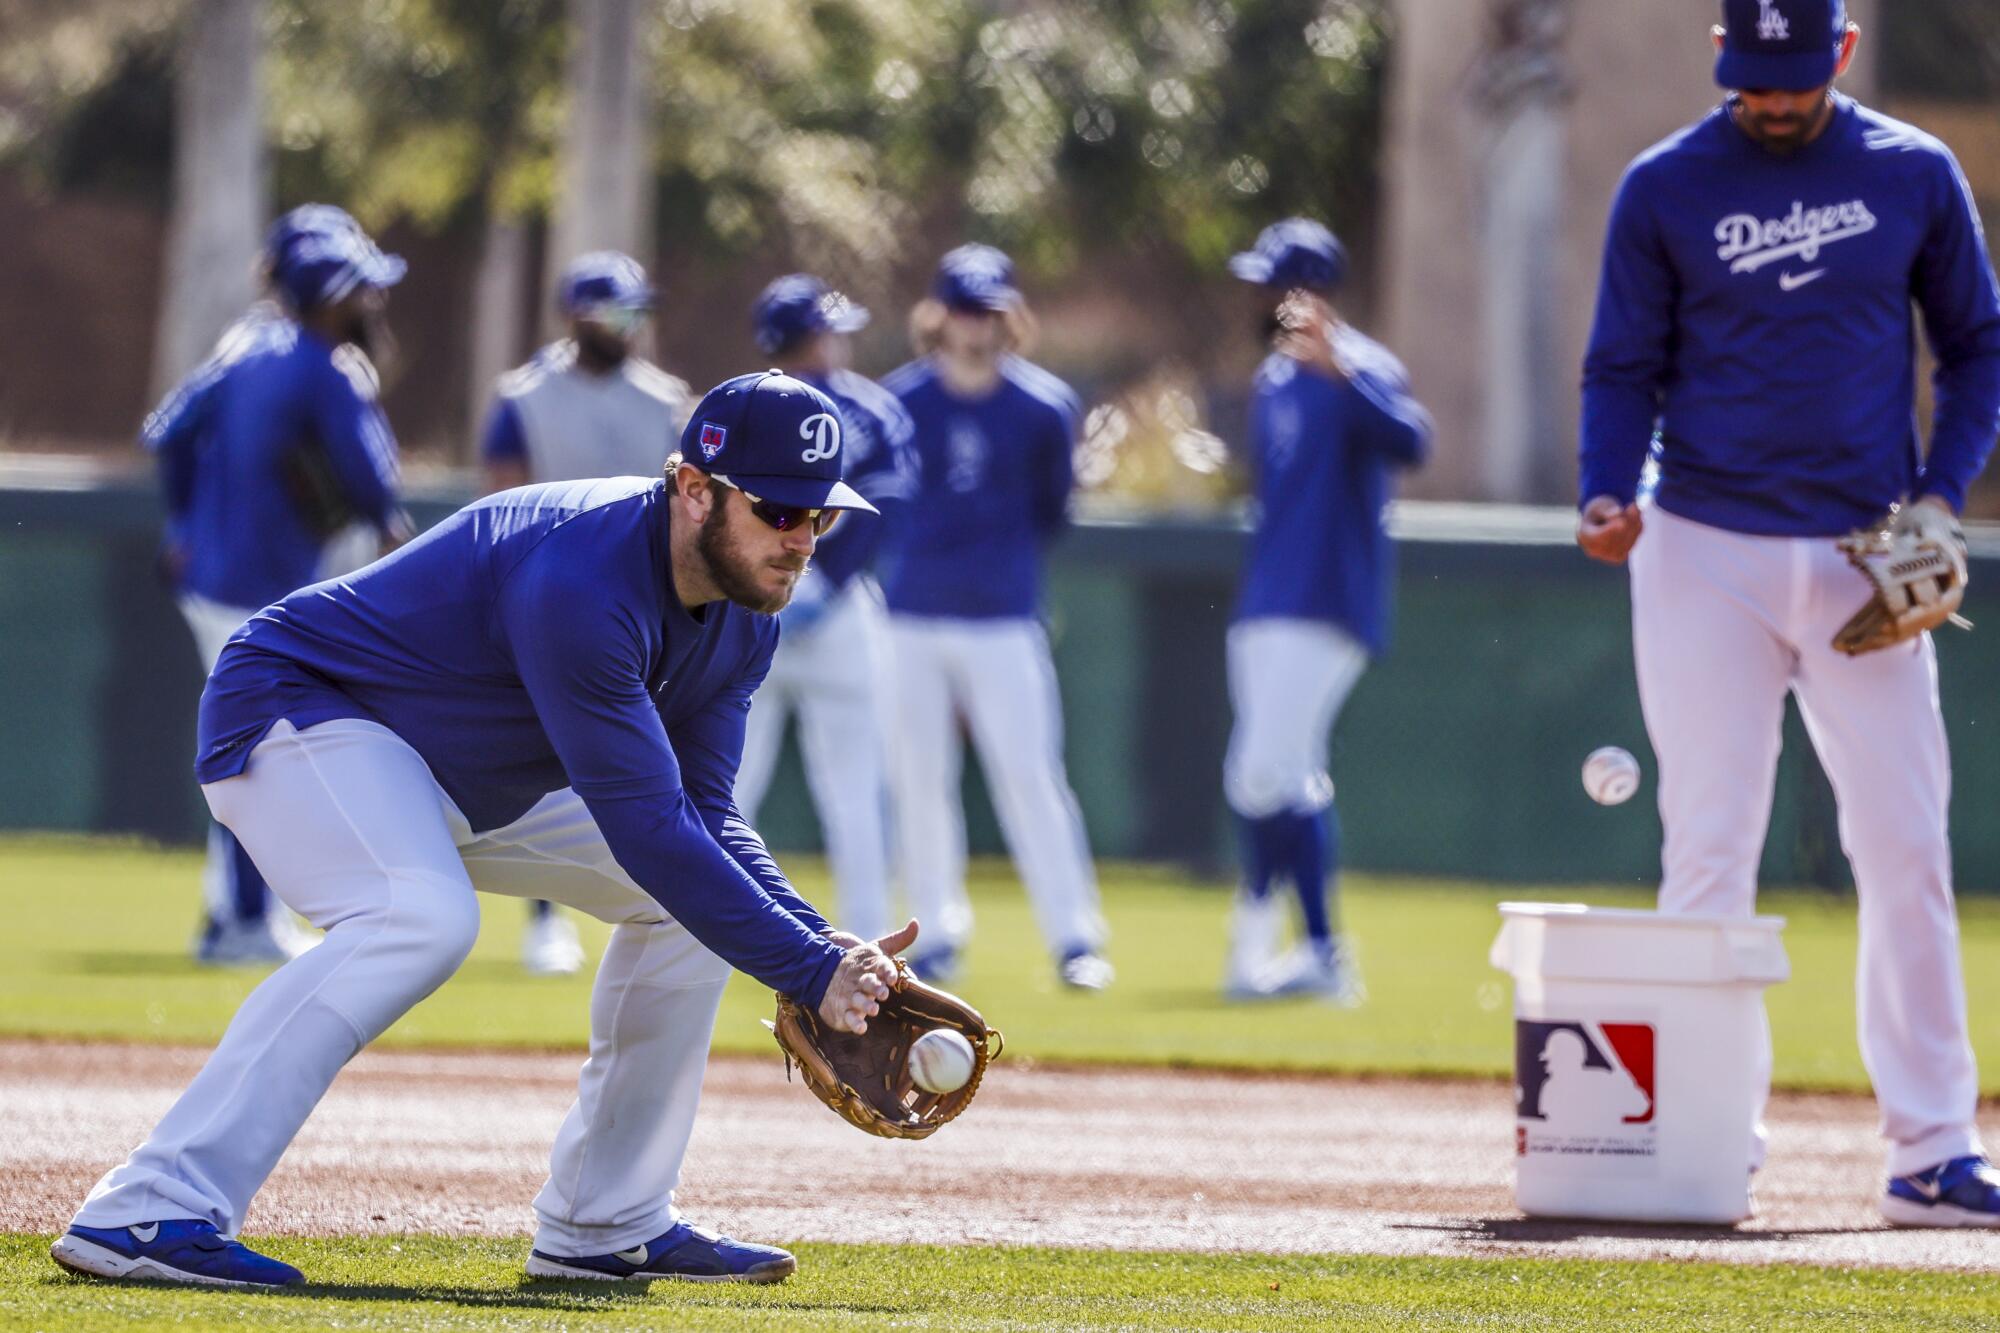 Dodgers infielder Max Muncy fields a grounder during the second day of spring training at Camelback Ranch.